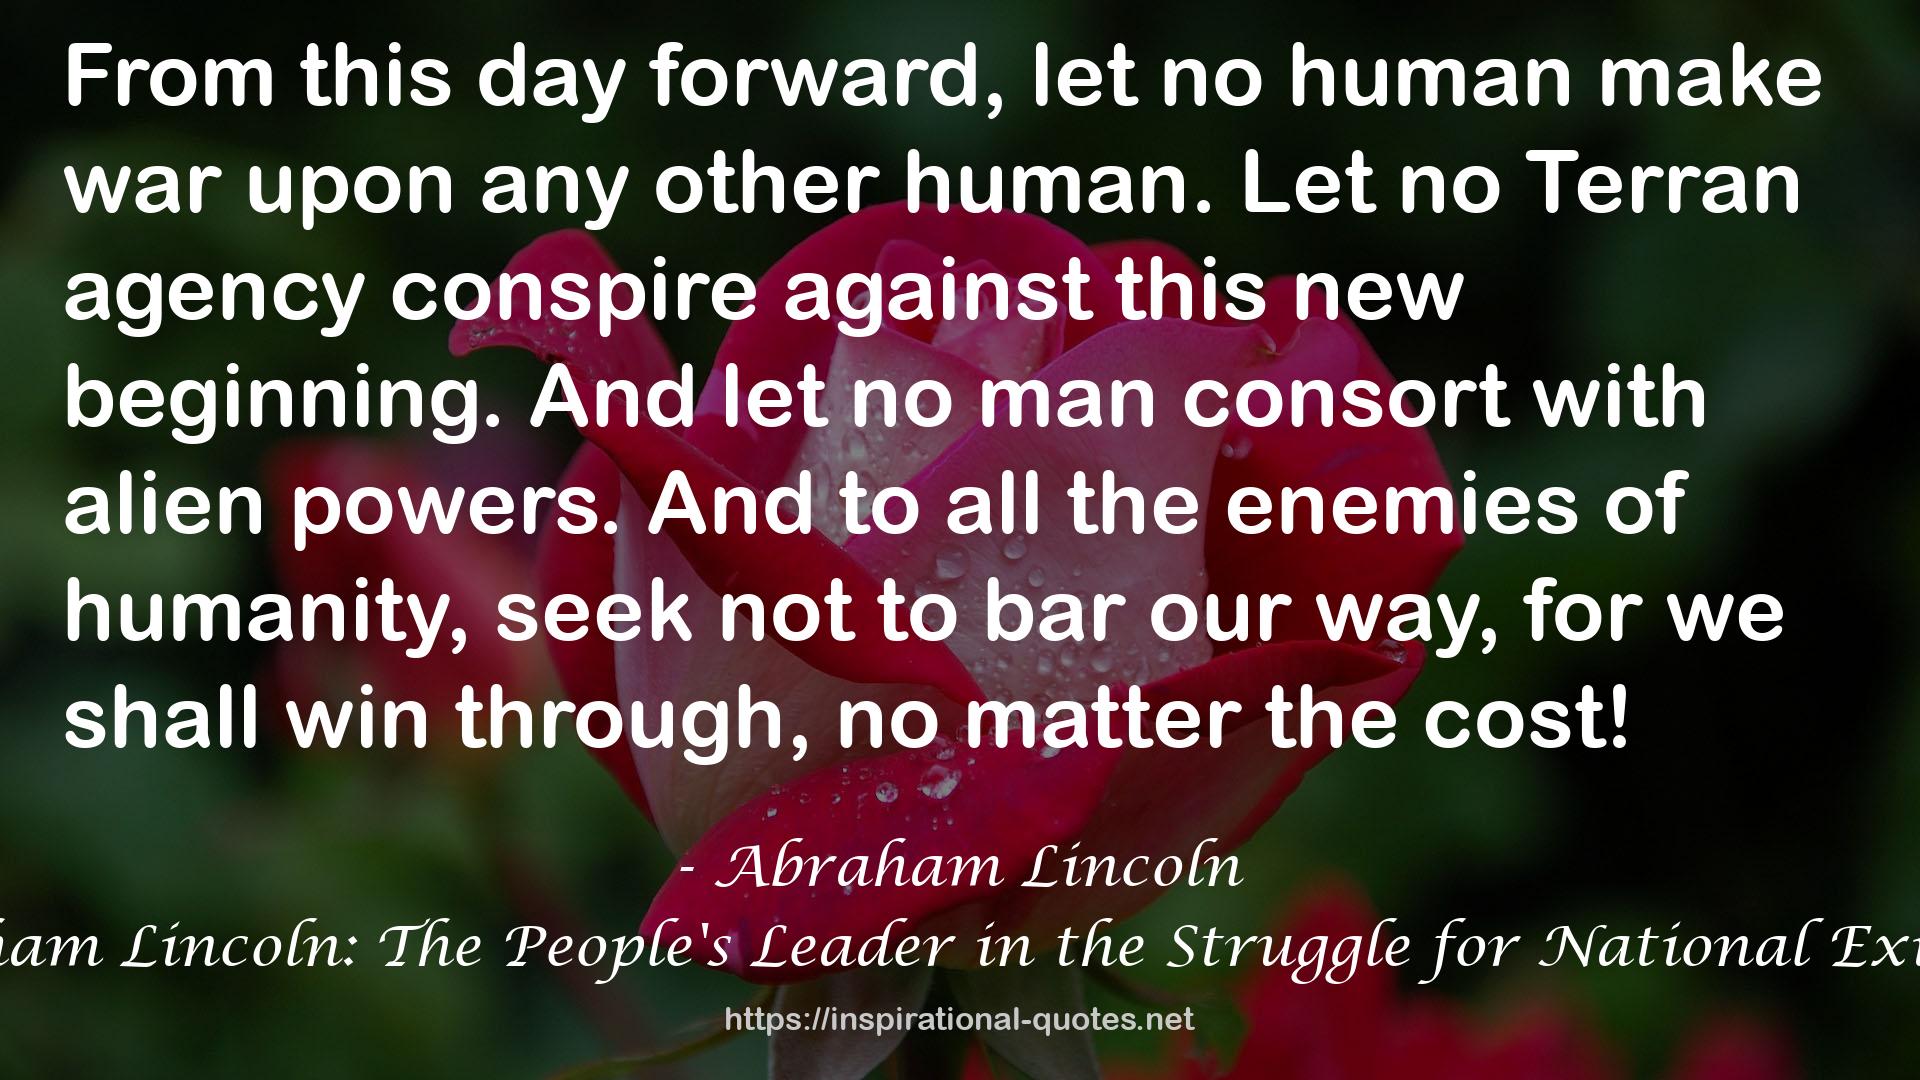 Abraham Lincoln: The People's Leader in the Struggle for National Existence QUOTES